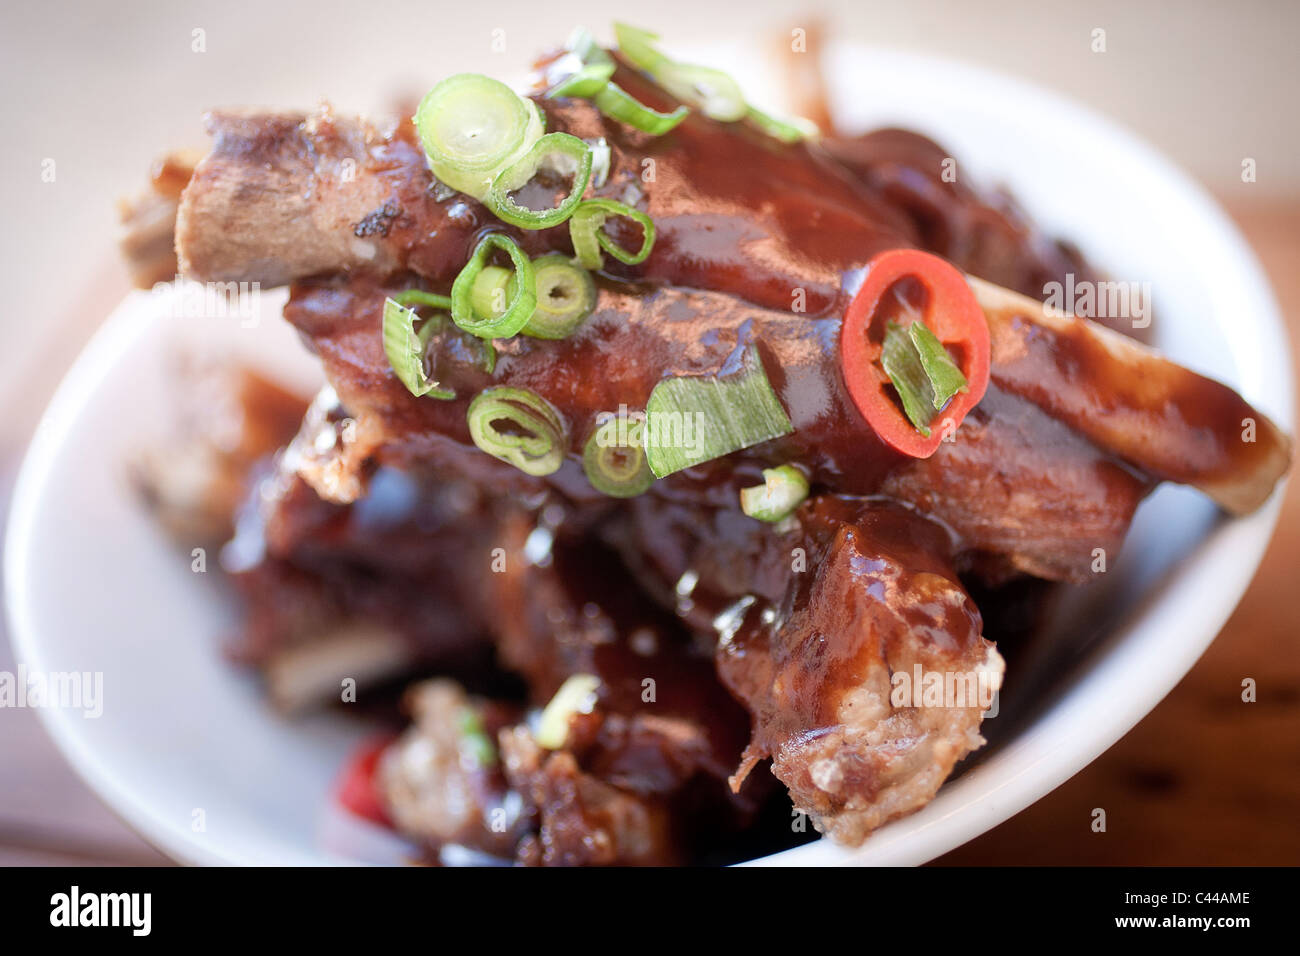 A gourmet dish of sticky Chinese style spare ribs served with chili, ginger and spring onions Stock Photo